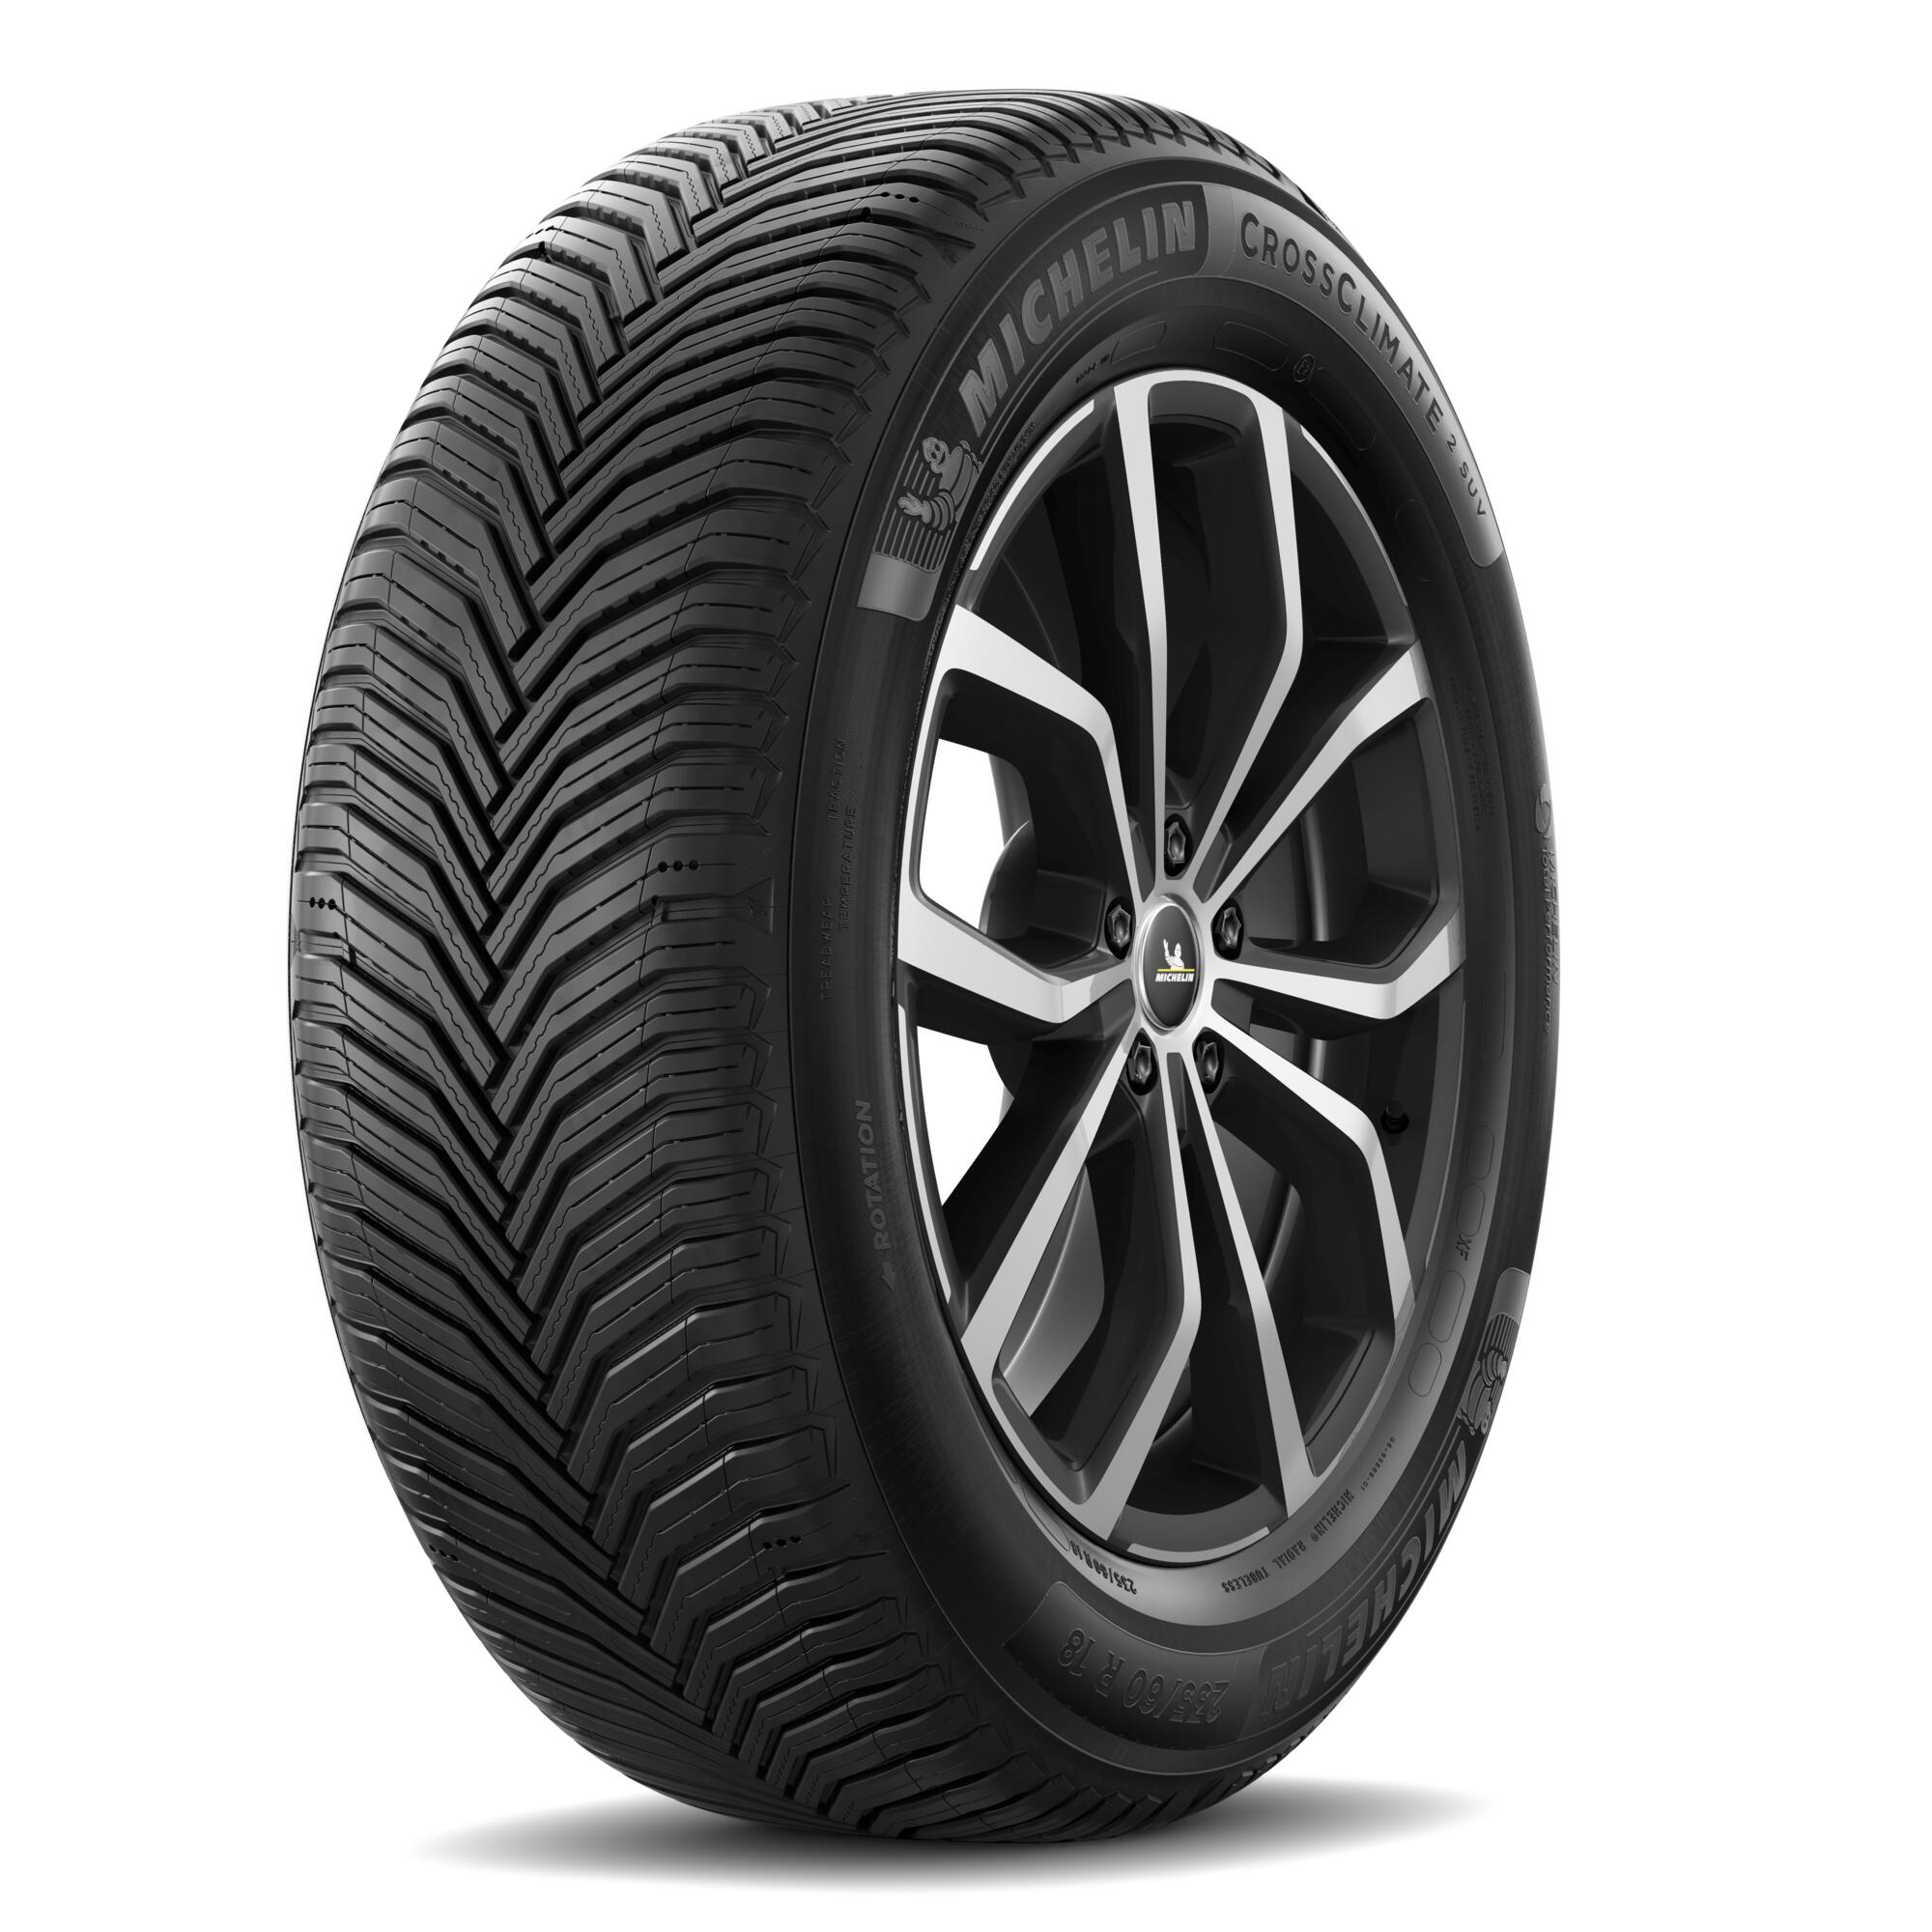 Michelin CrossClimate 2 SUV - Tyre Reviews and Tests